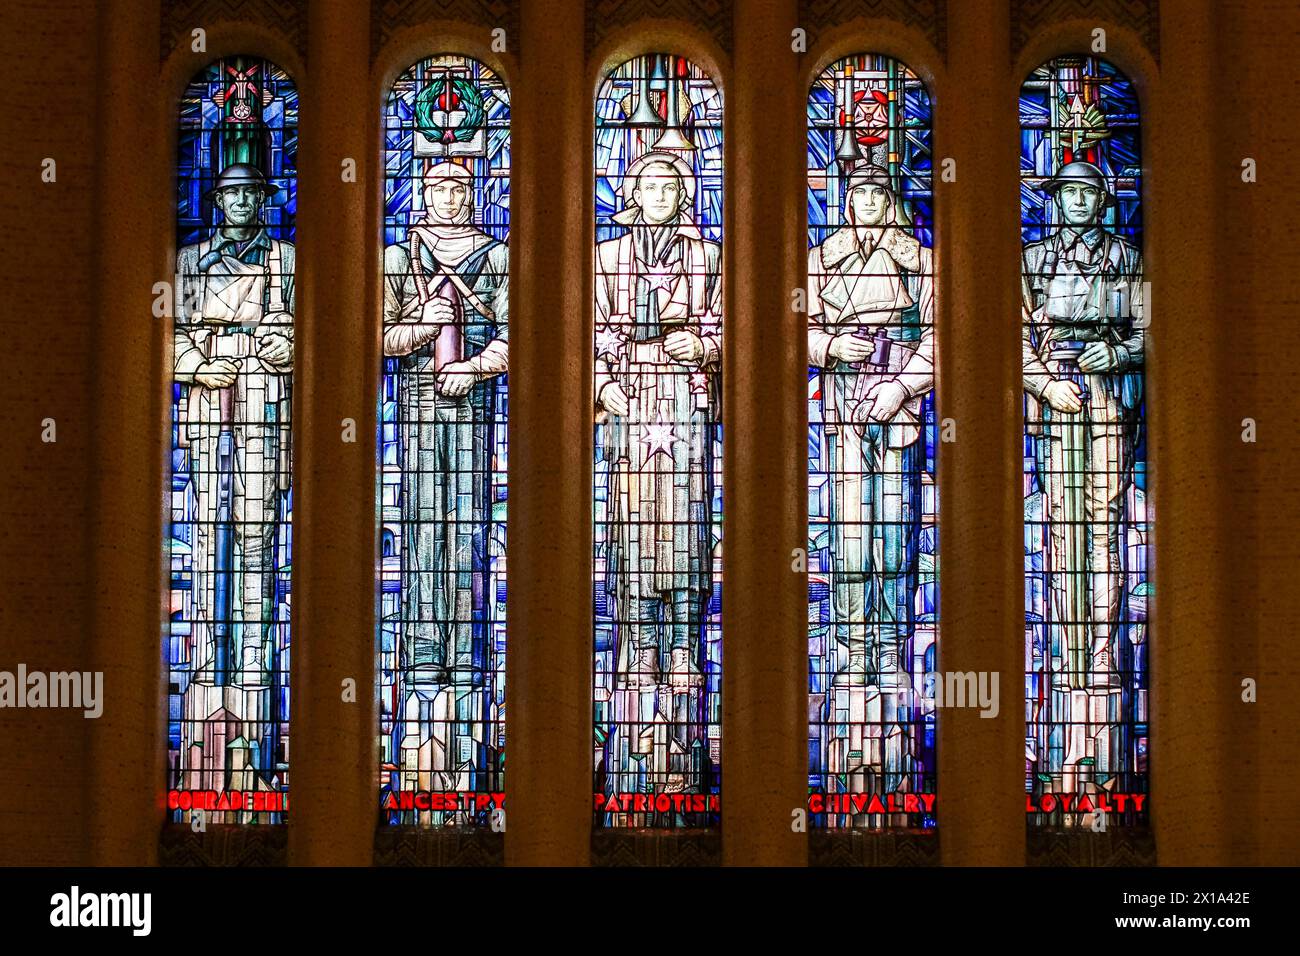 Canberra, Australia - October 22, 2009 : Australian War Memorial. Stained glass window depicting comradeship, ancestry,  patriotism, chivalry, loyalty. Stock Photo